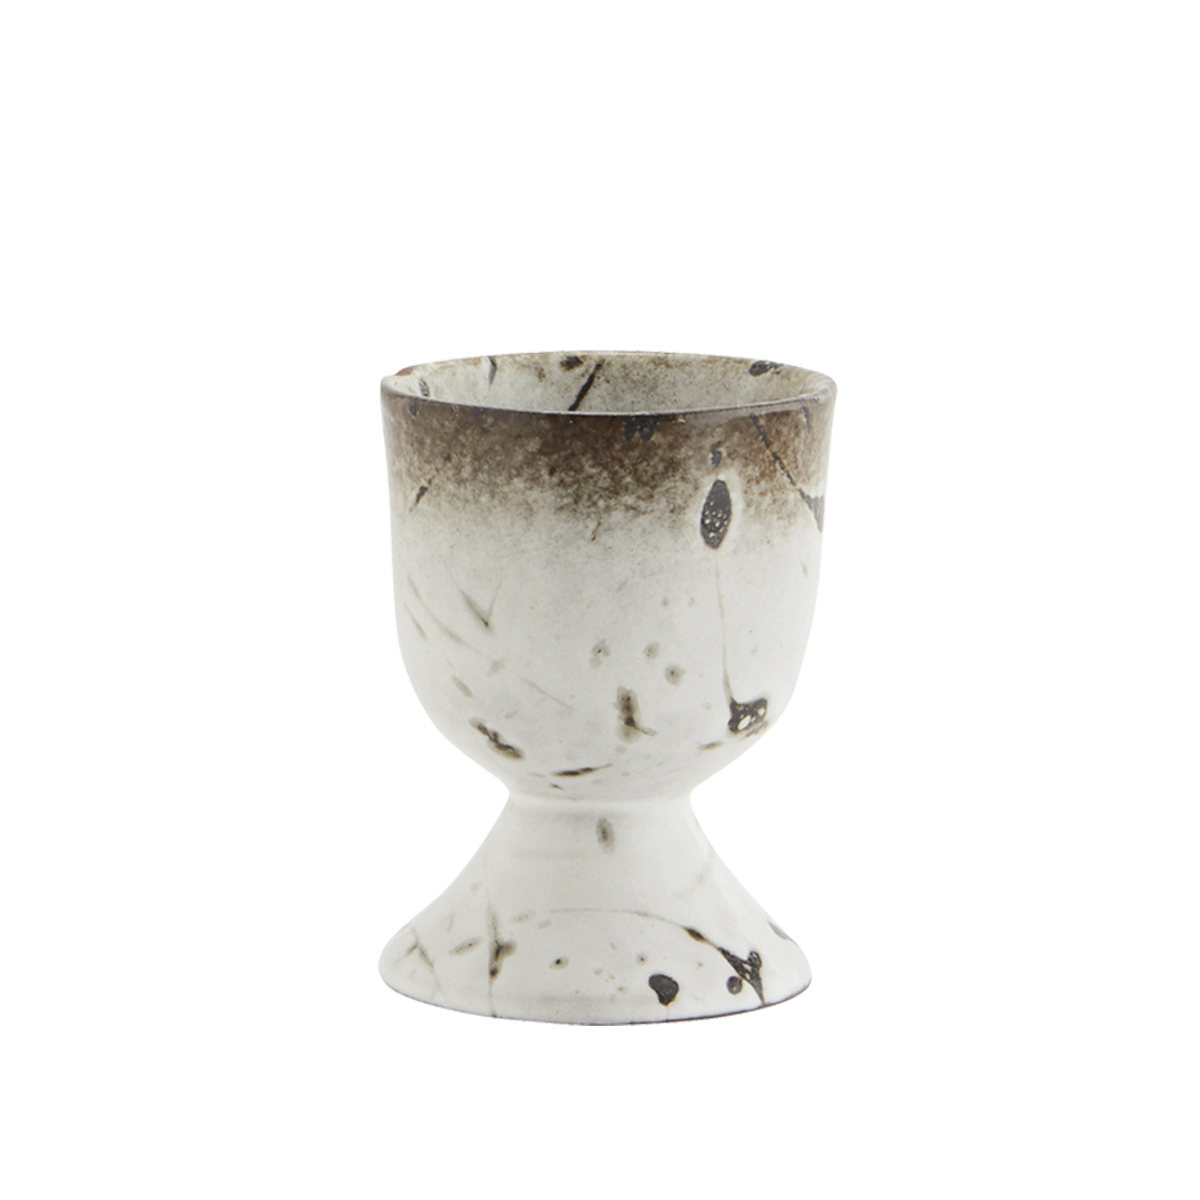 Stoneware egg cup